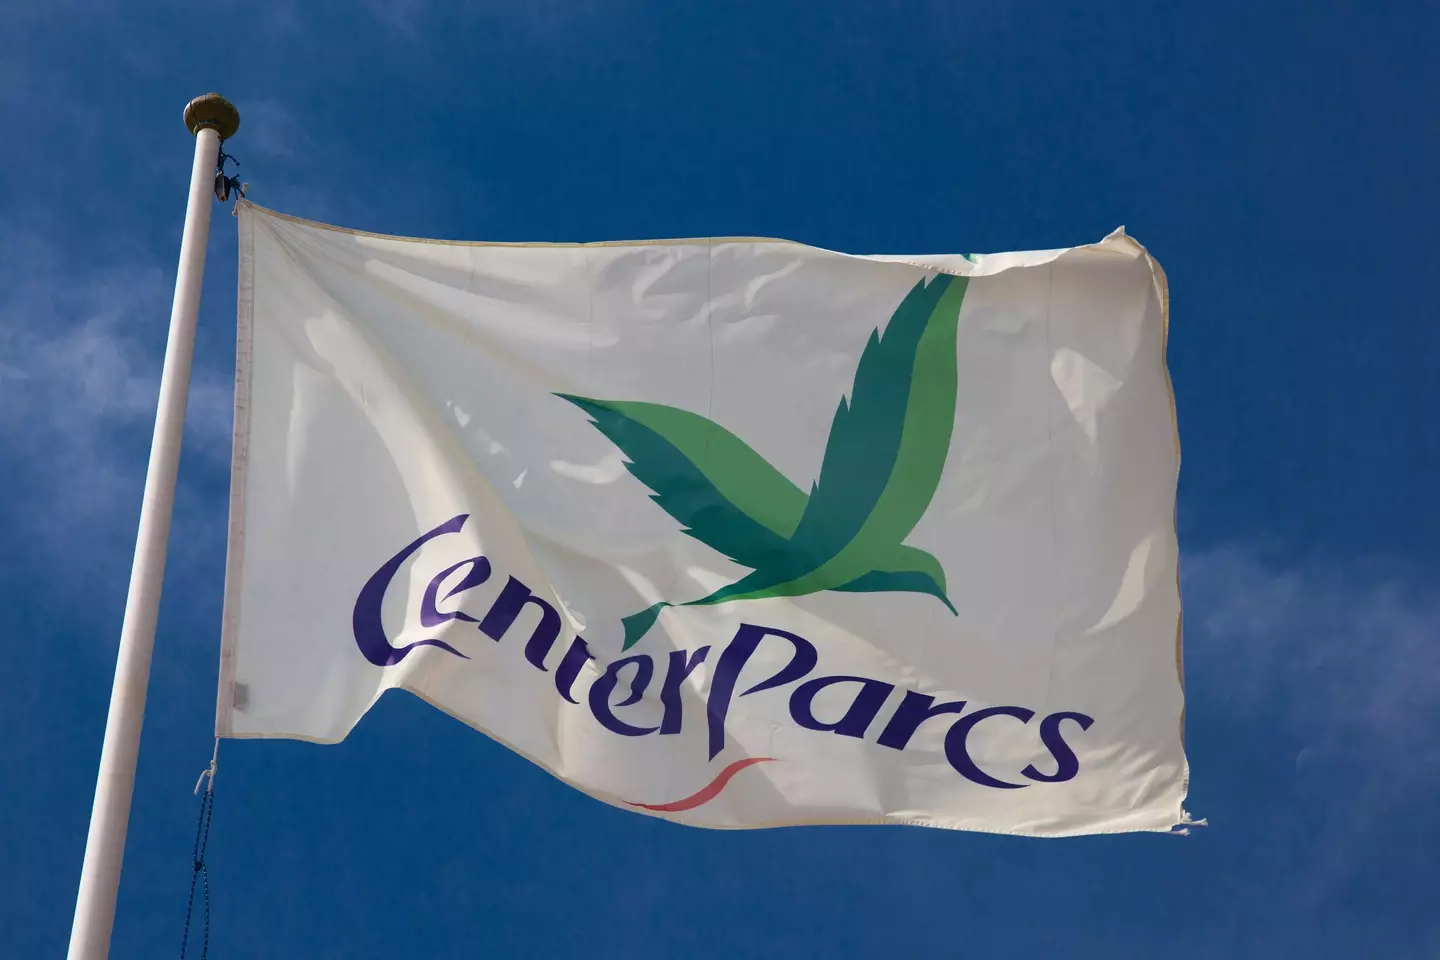 Center Parcs faced a backlash from customers.